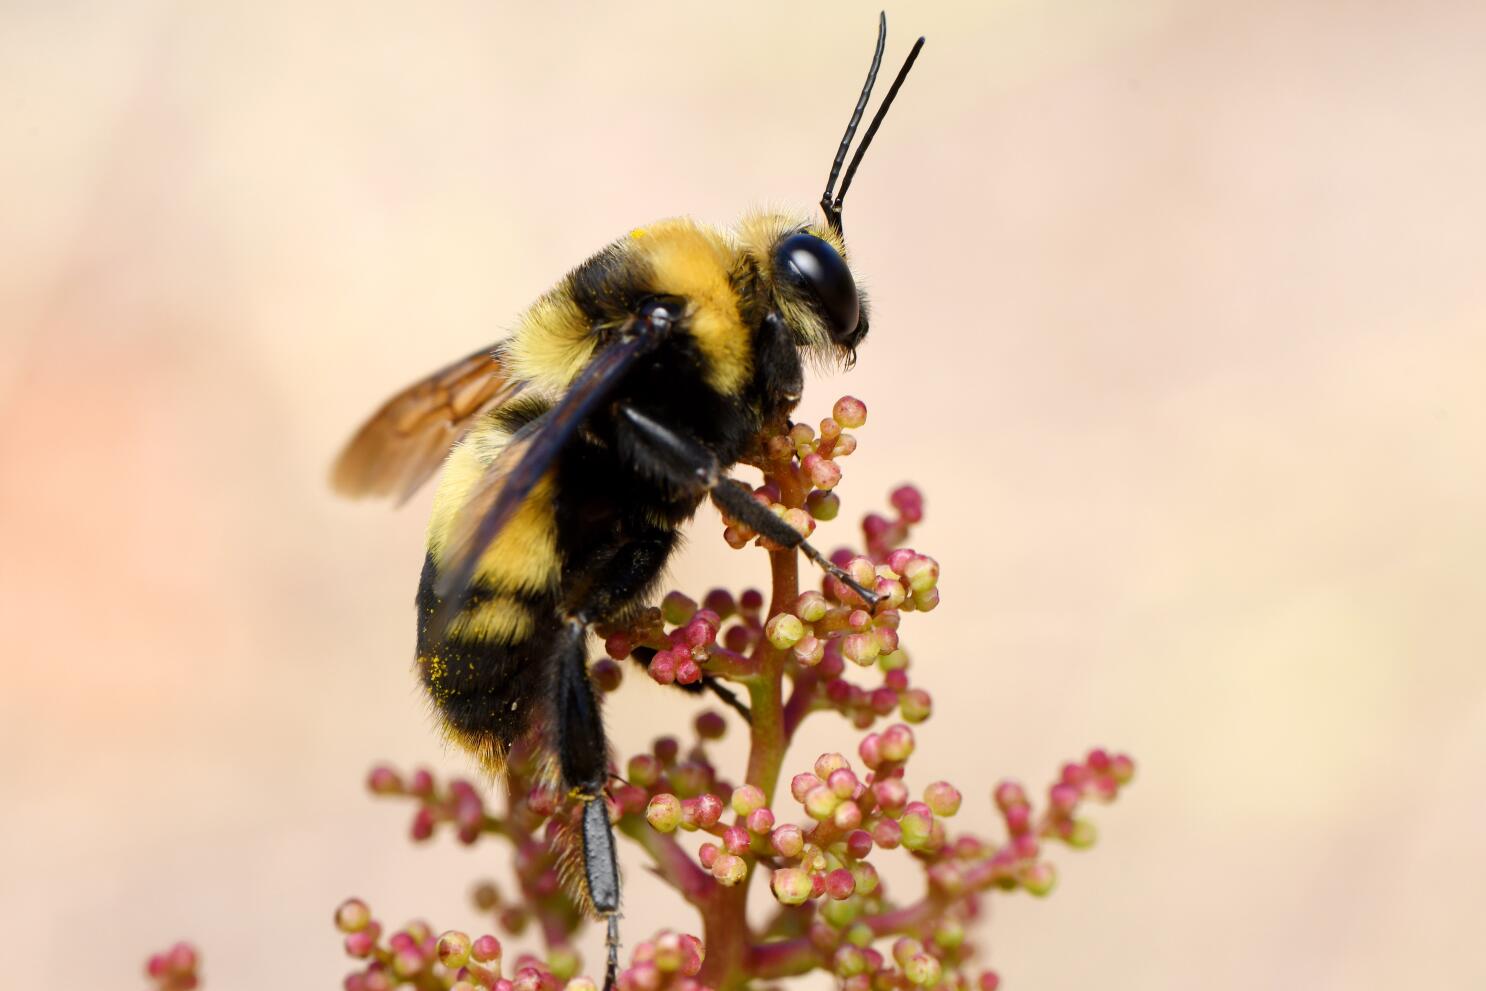 Bumblebees can be protected as “fish” California court rules - Los